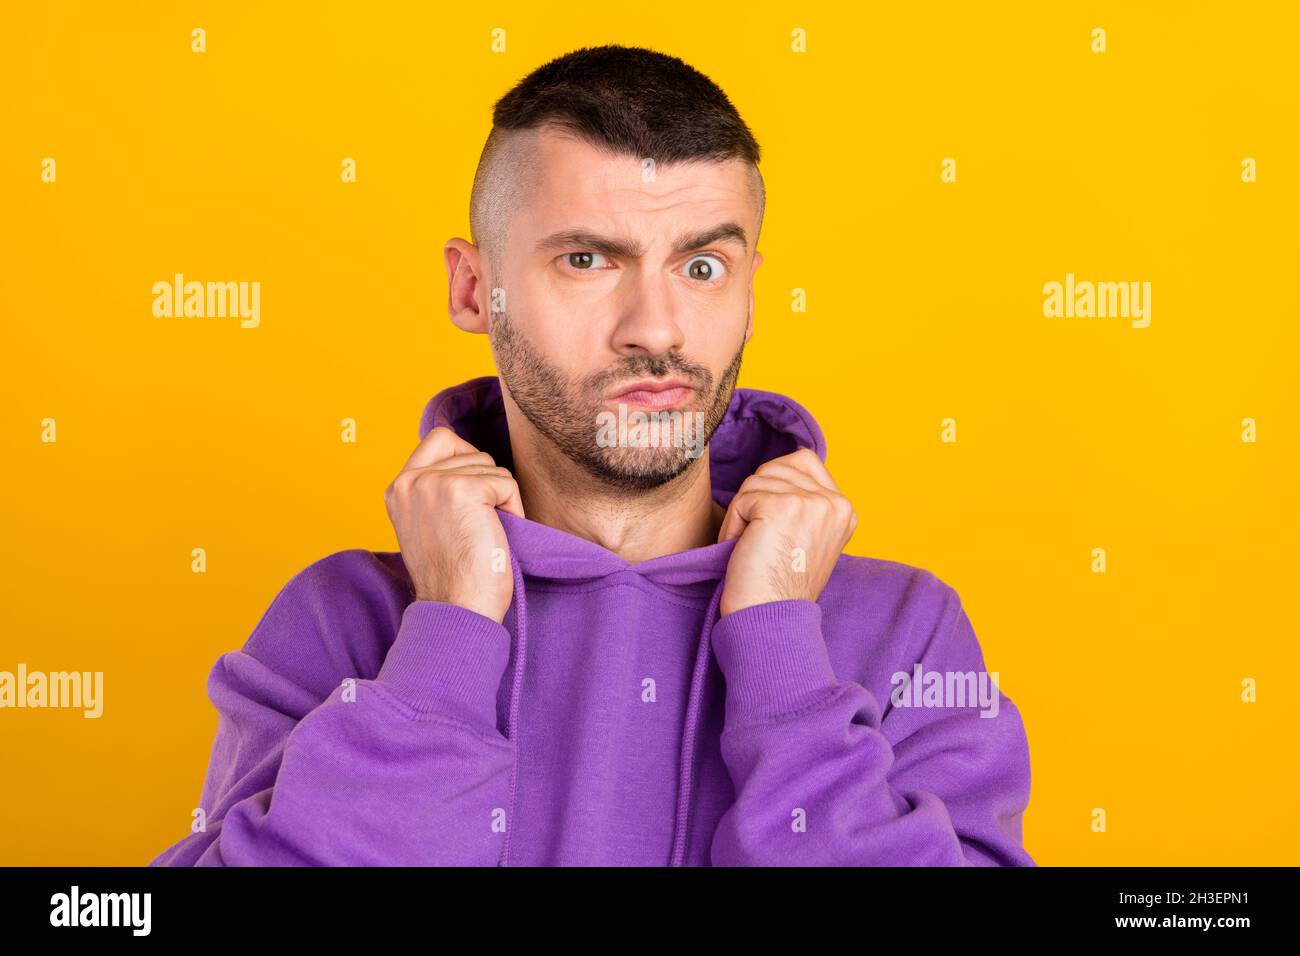 Photo portrait young man wearing purple hoody unsure got doubt isolated vibrant yellow color background Stock Photo